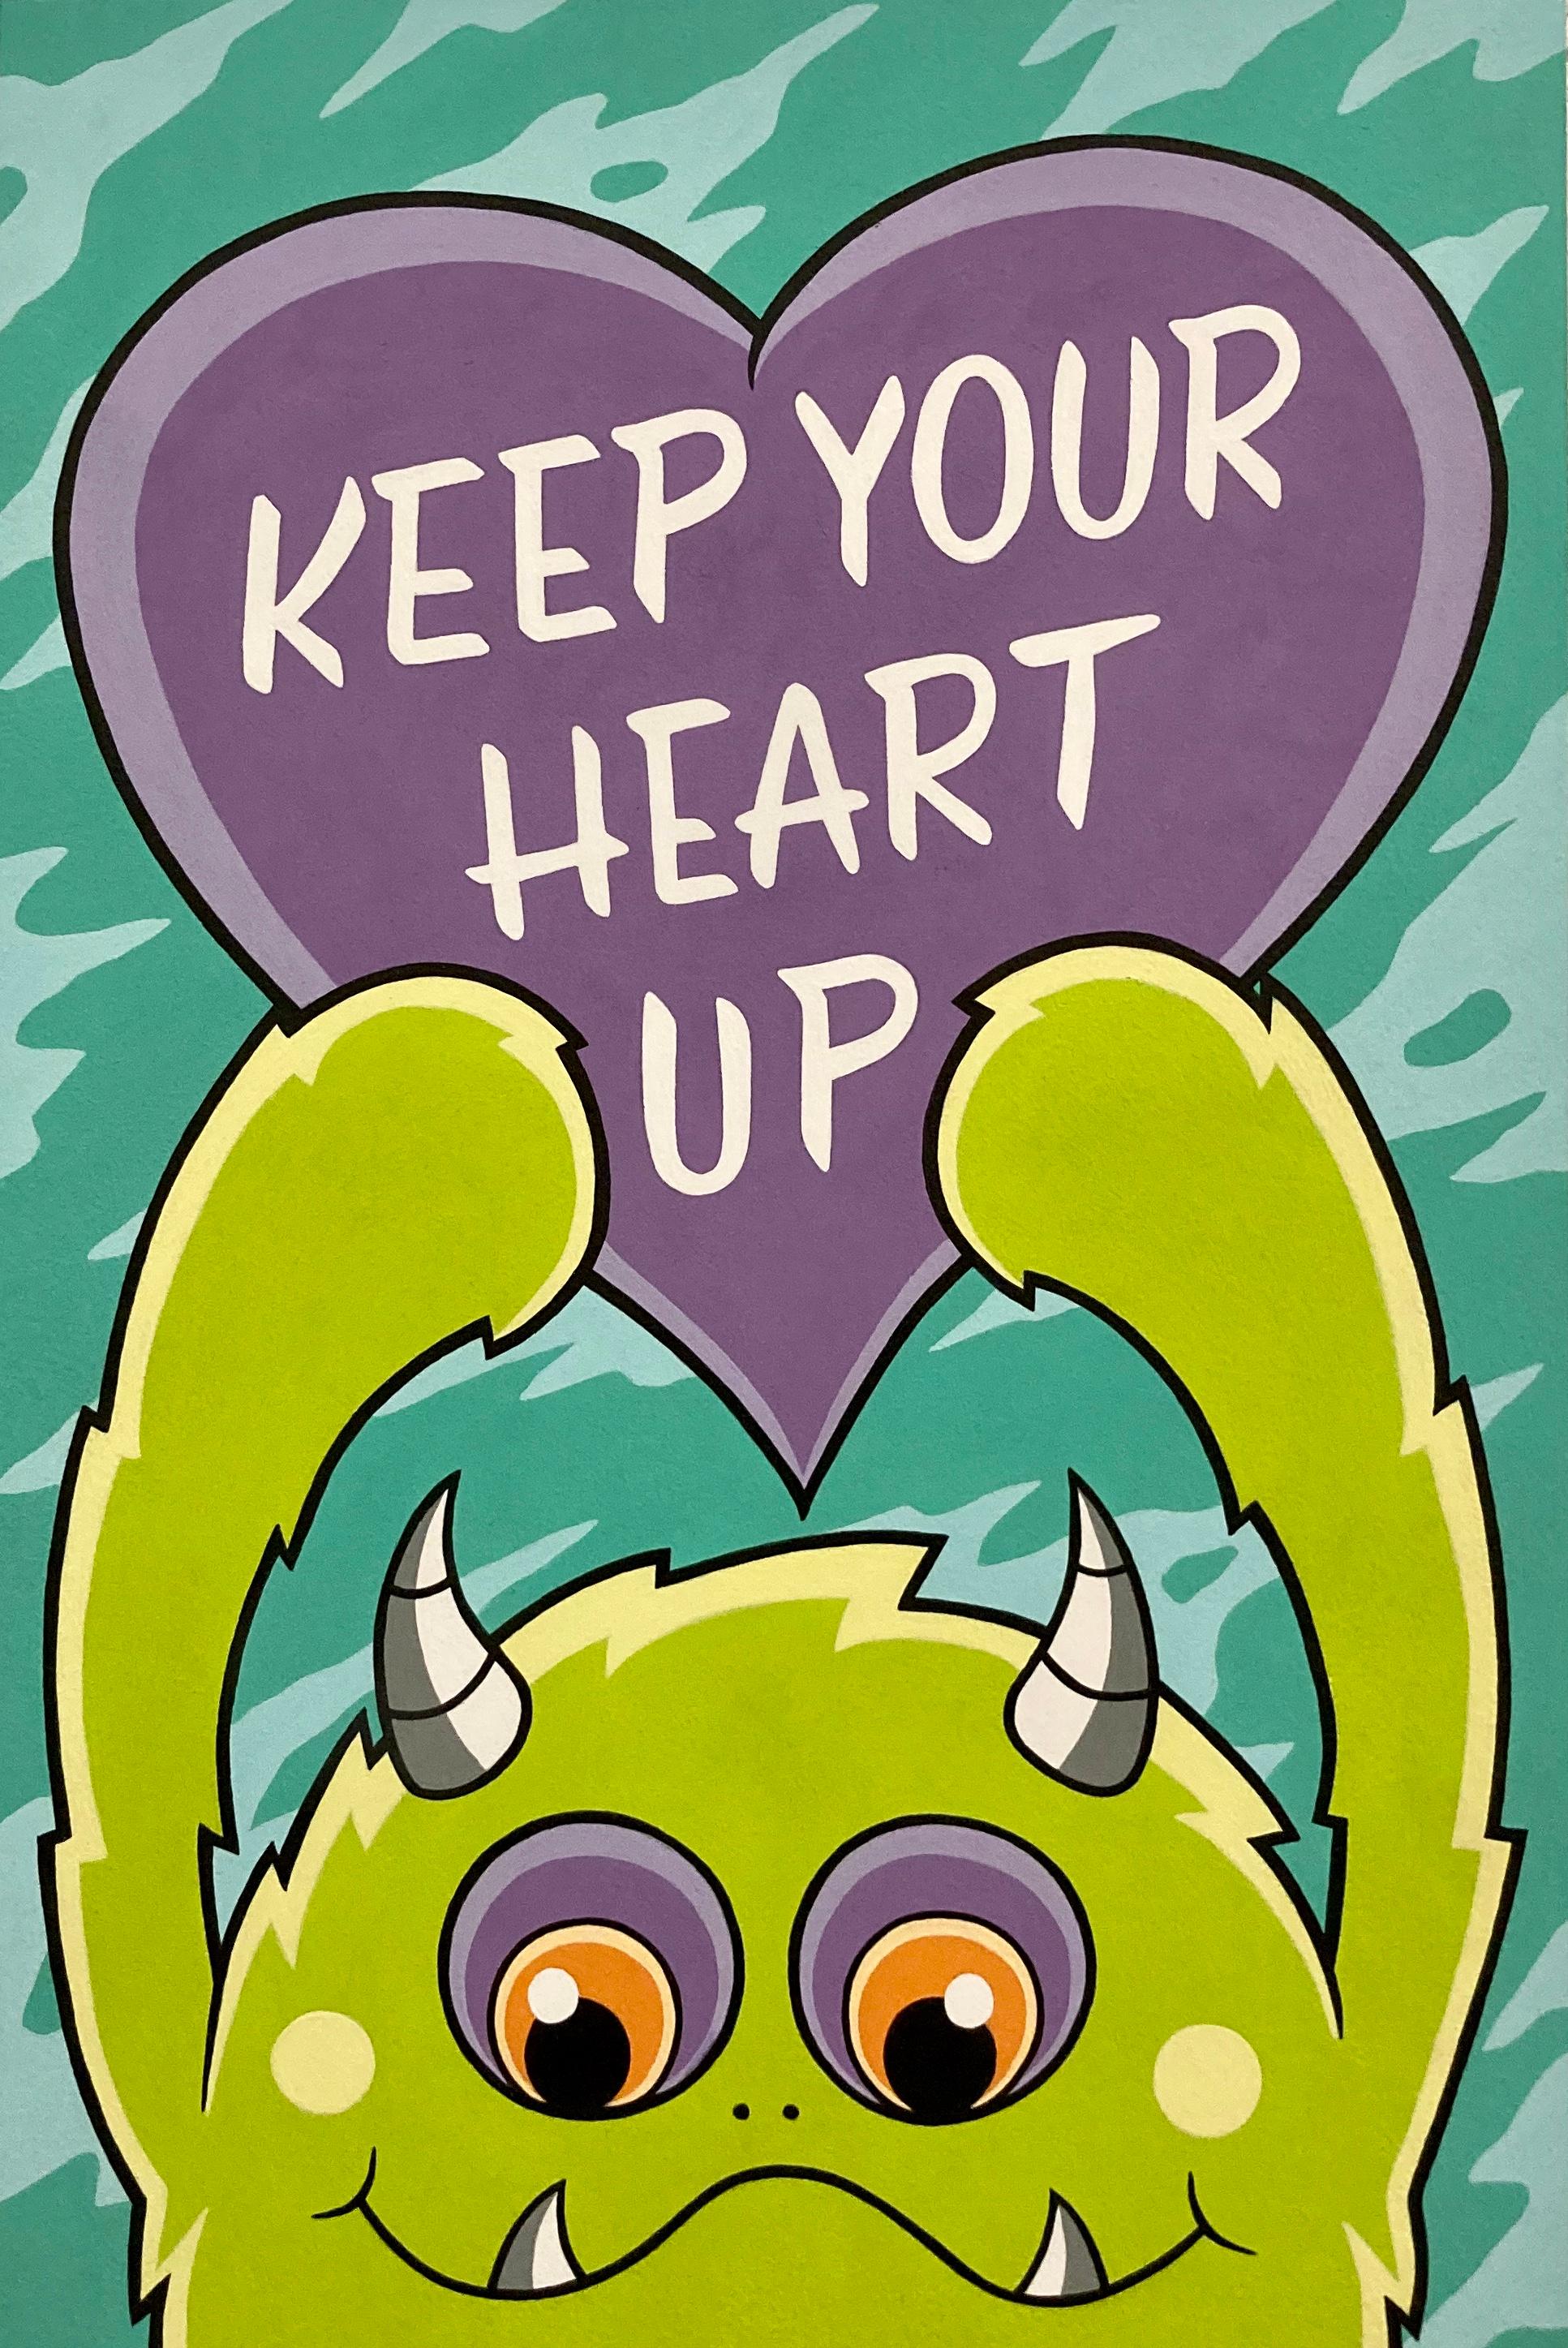 Keep Your Heart Up - Painting by Sinned